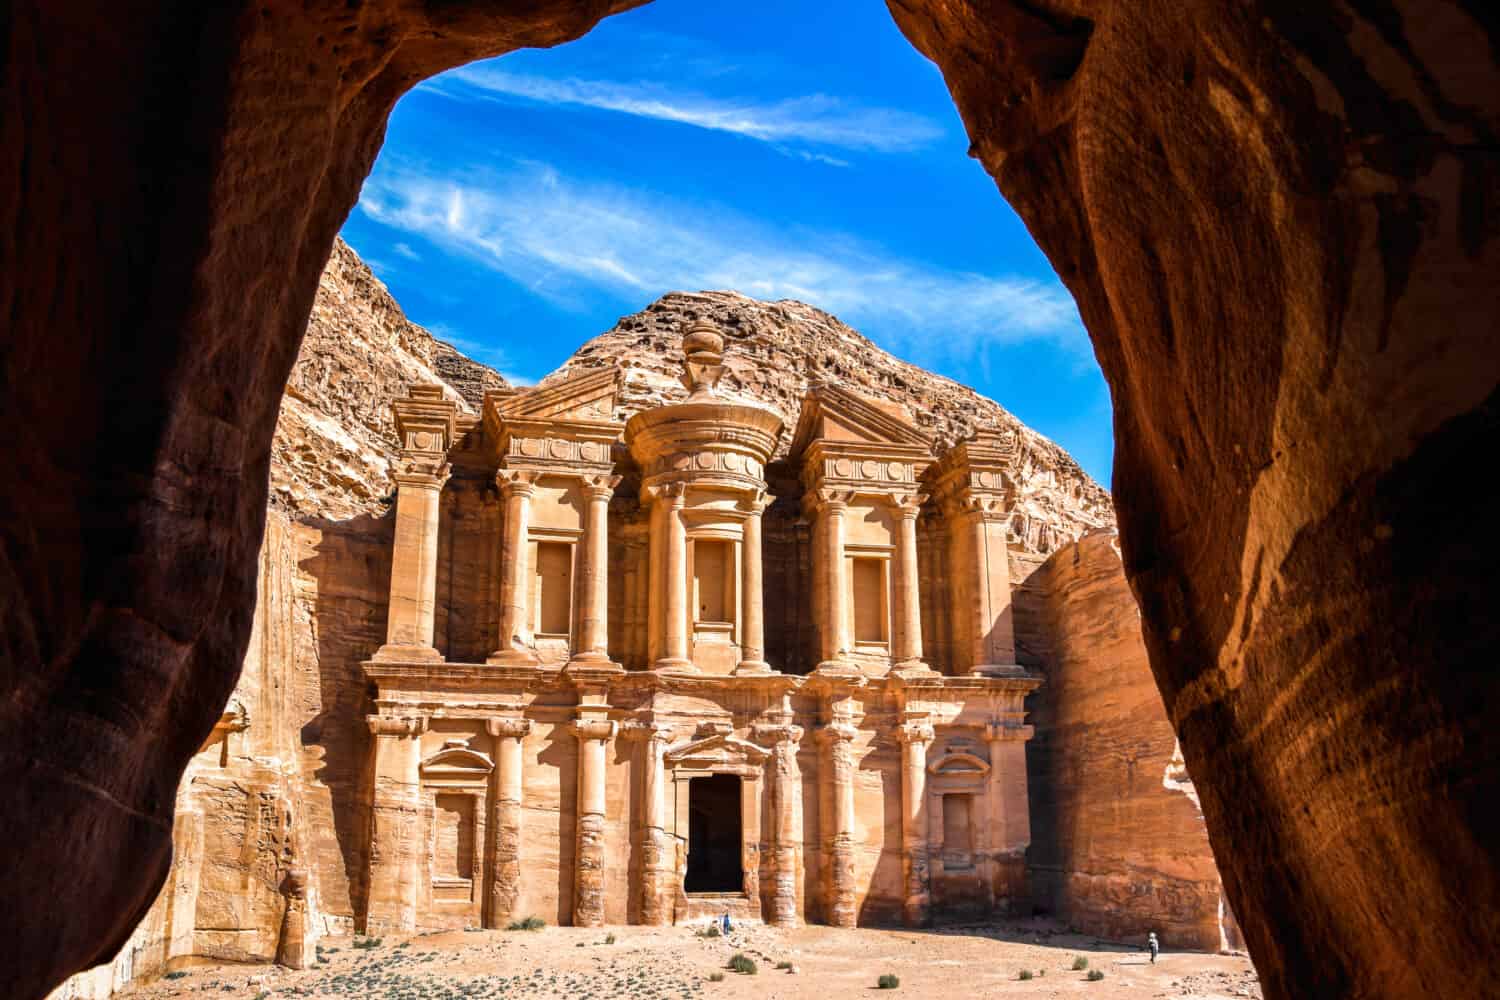 Stunning view from a cave of the Ad Deir - Monastery in the ancient city of Petra, Jordan: Incredible UNESCO World Heritage Site.